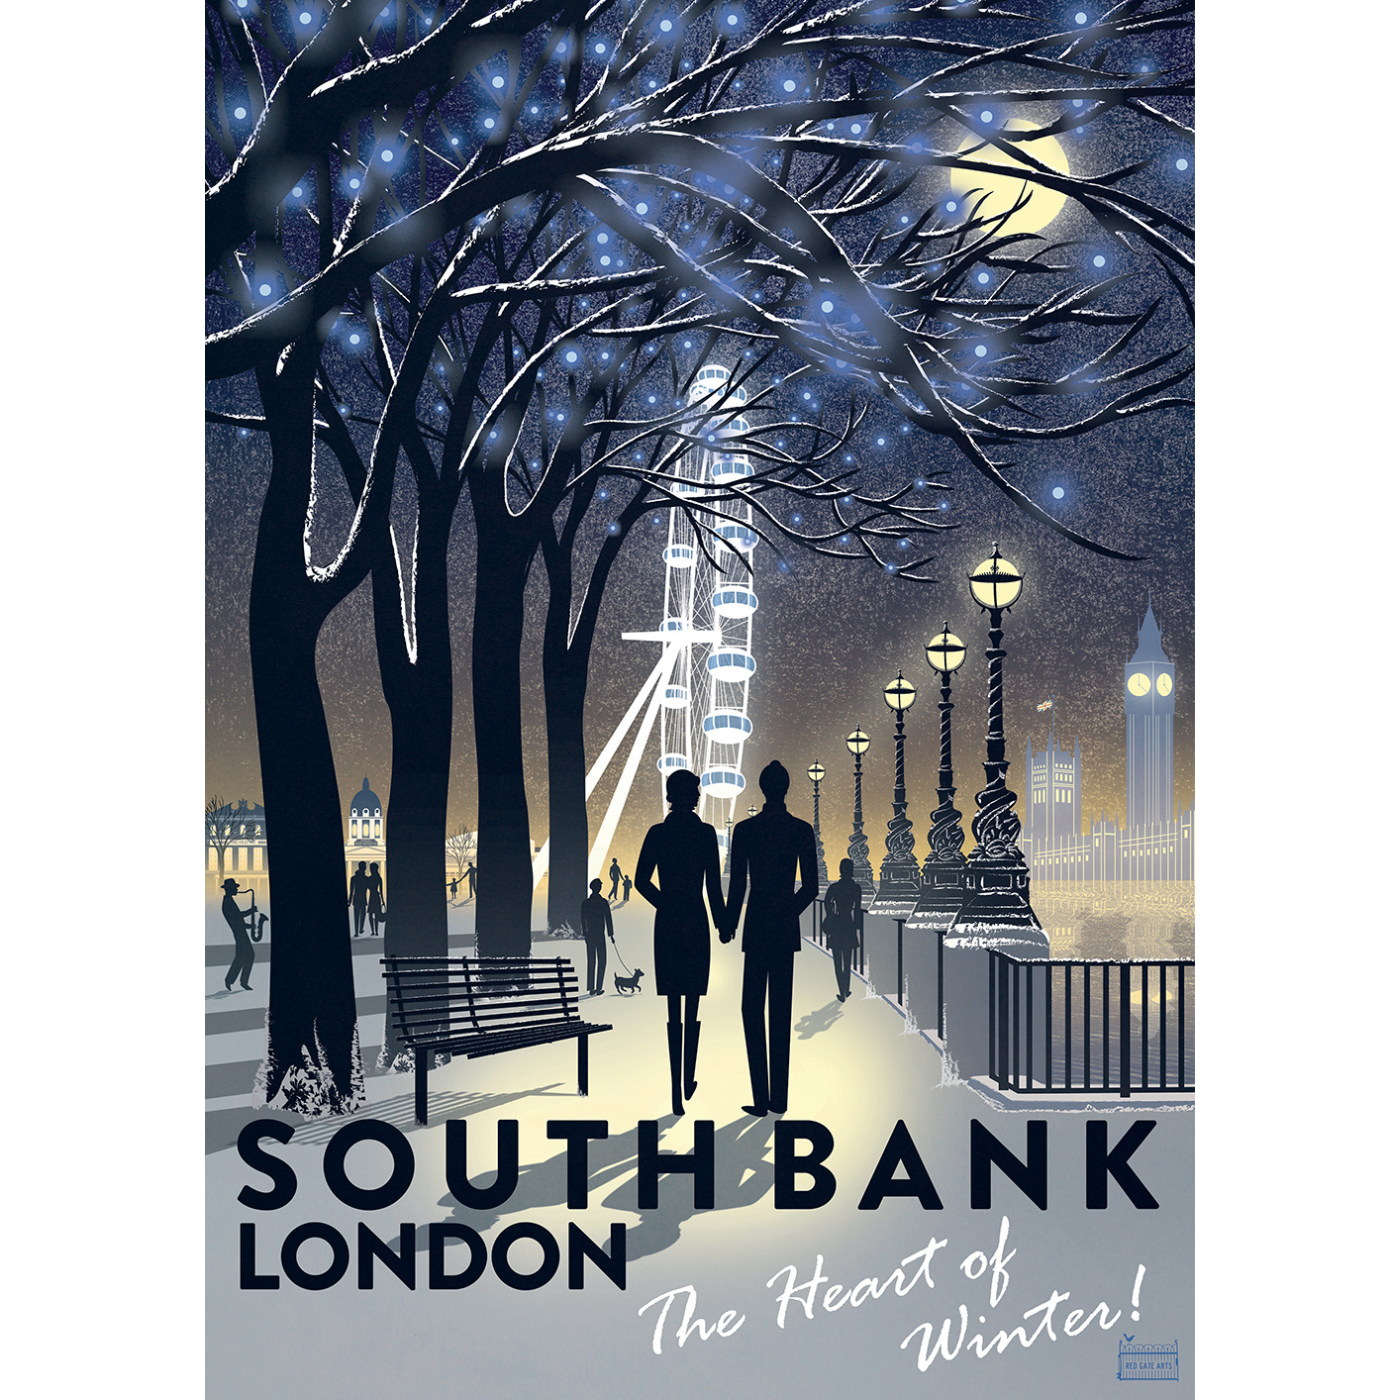 A poster with an illustration of people walking down the Southbank riverside towards the London eye, with snow and Winter lights in the trees.